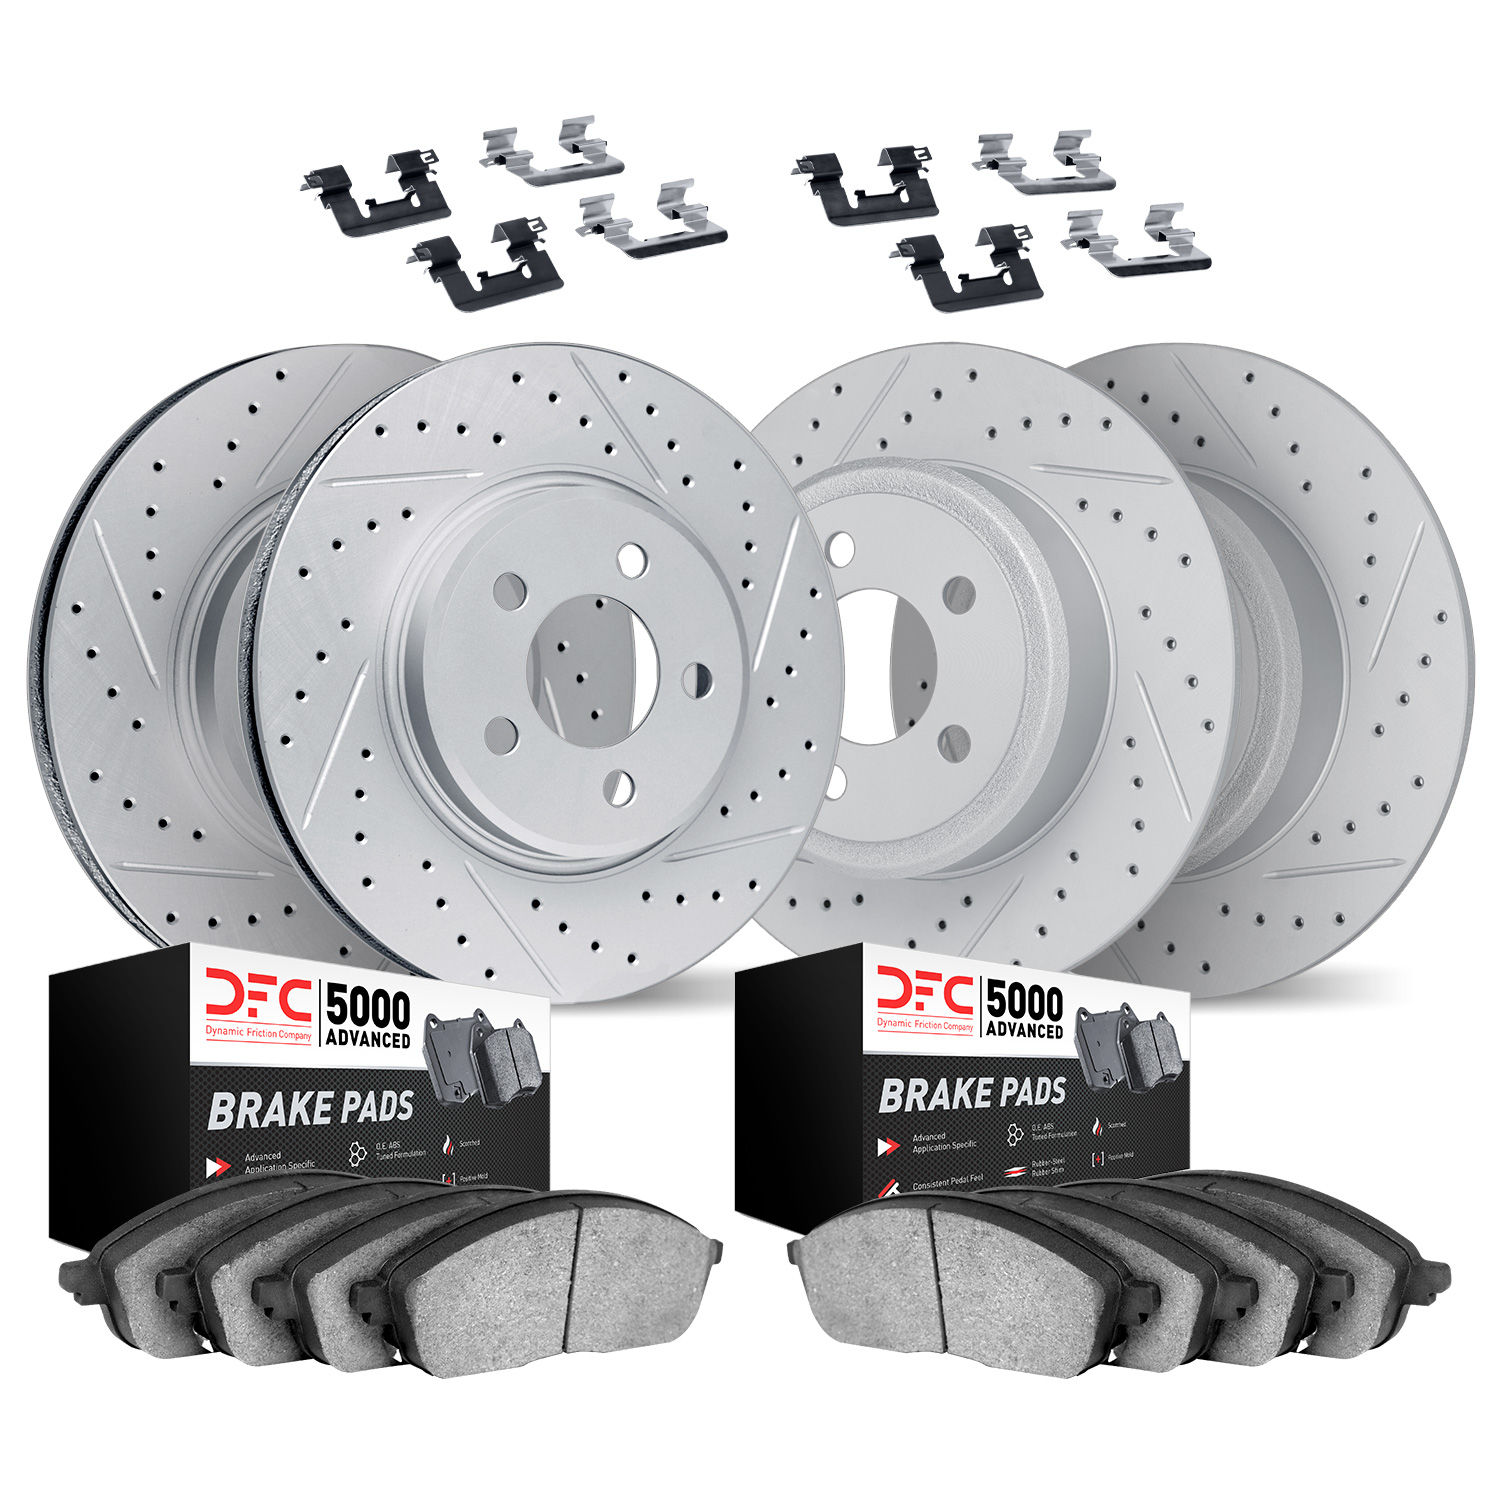 2514-59039 Geoperformance Drilled/Slotted Rotors w/5000 Advanced Brake Pads Kit & Hardware, 2011-2014 Acura/Honda, Position: Fro